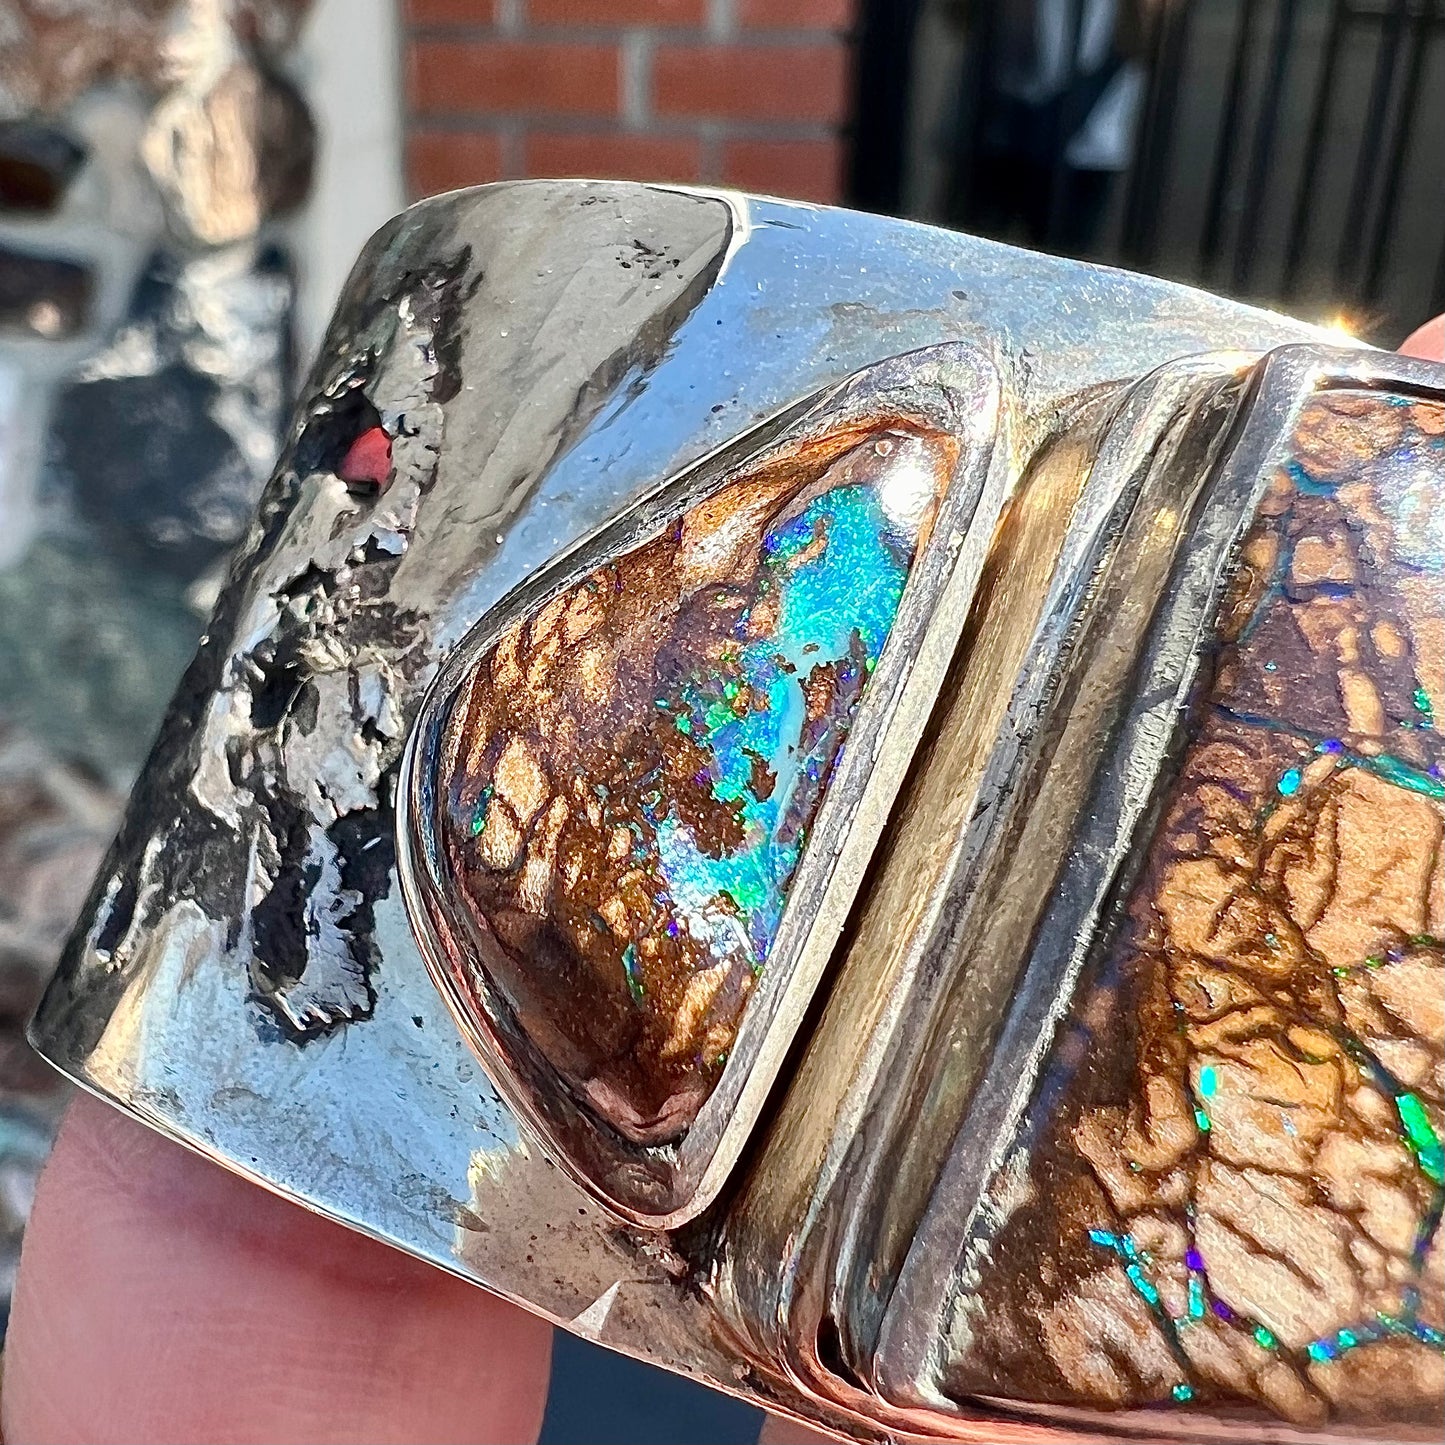 A men's sterling silver and copper infused cuff bracelet set with two boulder opal stones from Koroit, Australia.